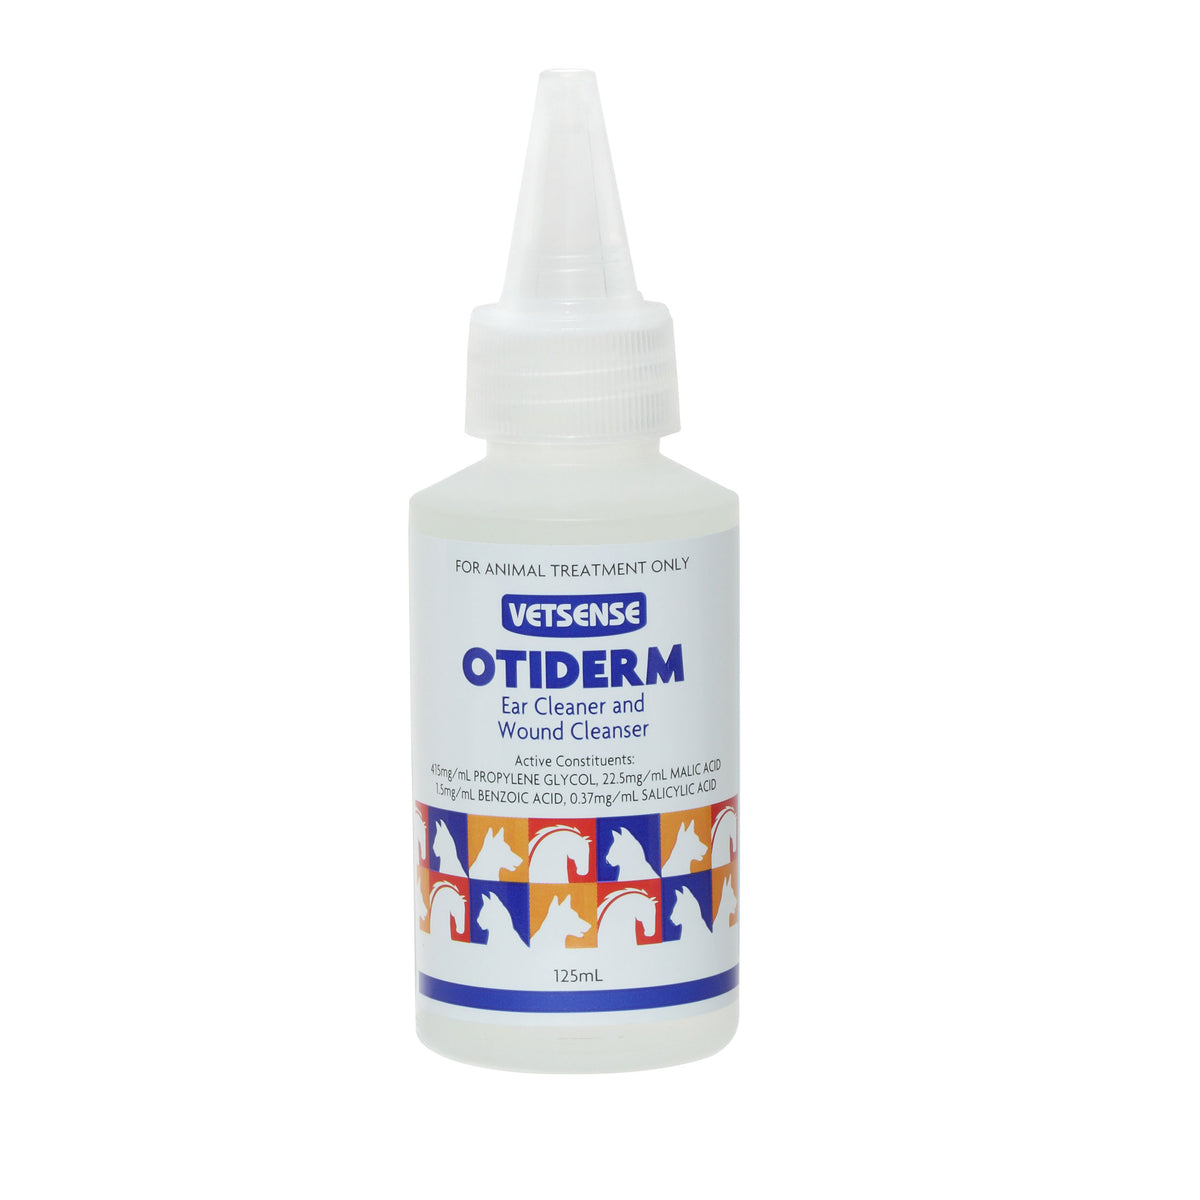 Otiderm Ear Cleaner and Wound Cleanser